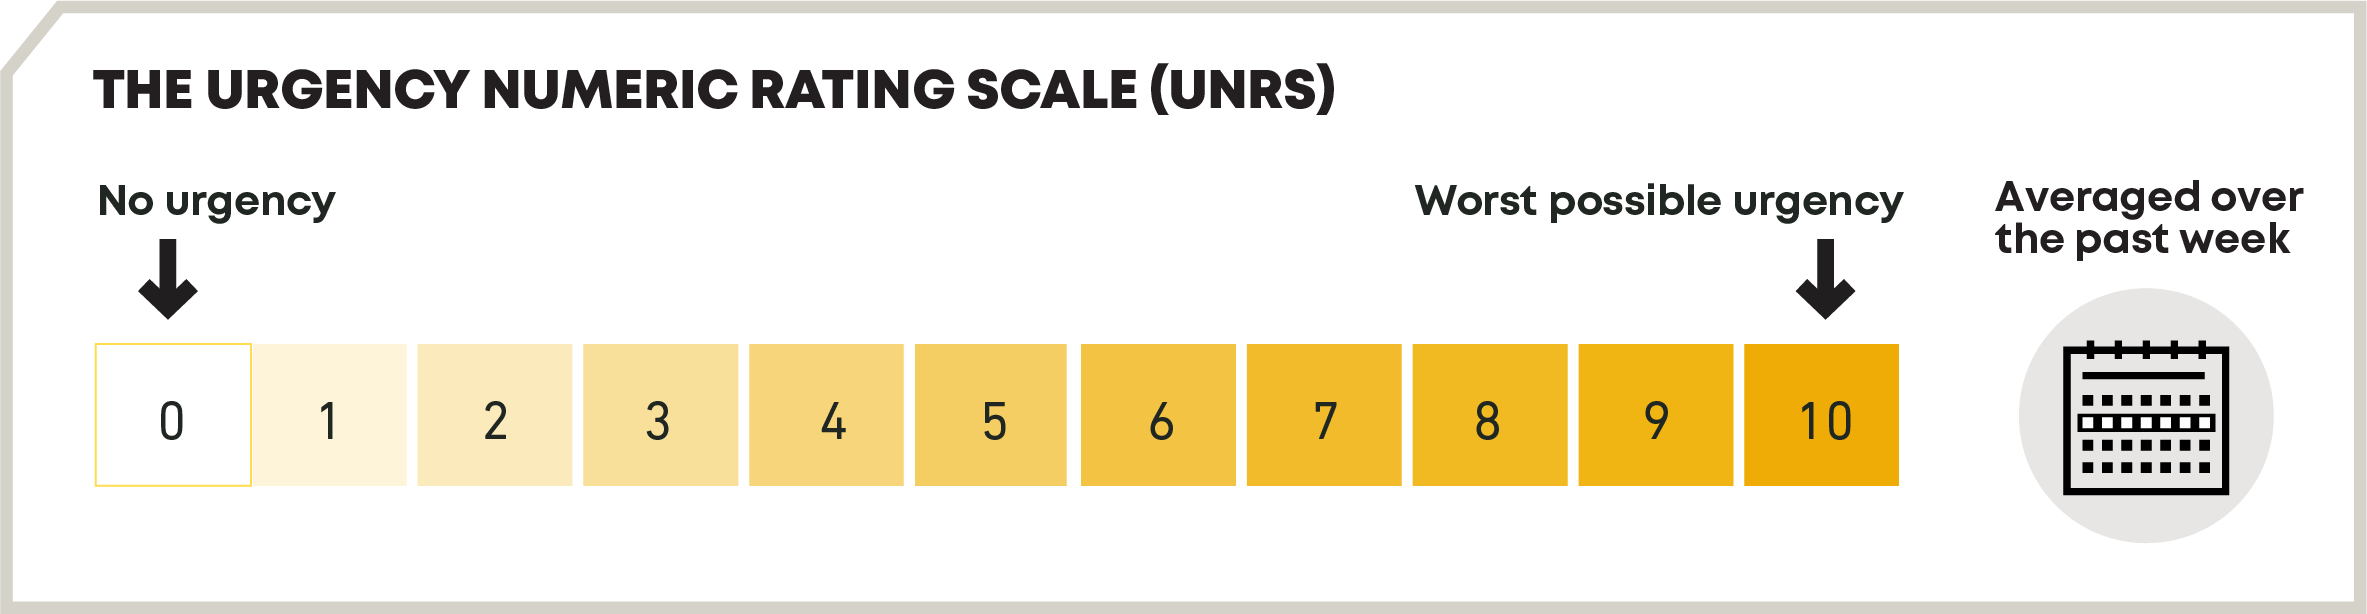 The Urgency Numeric Rating Scale